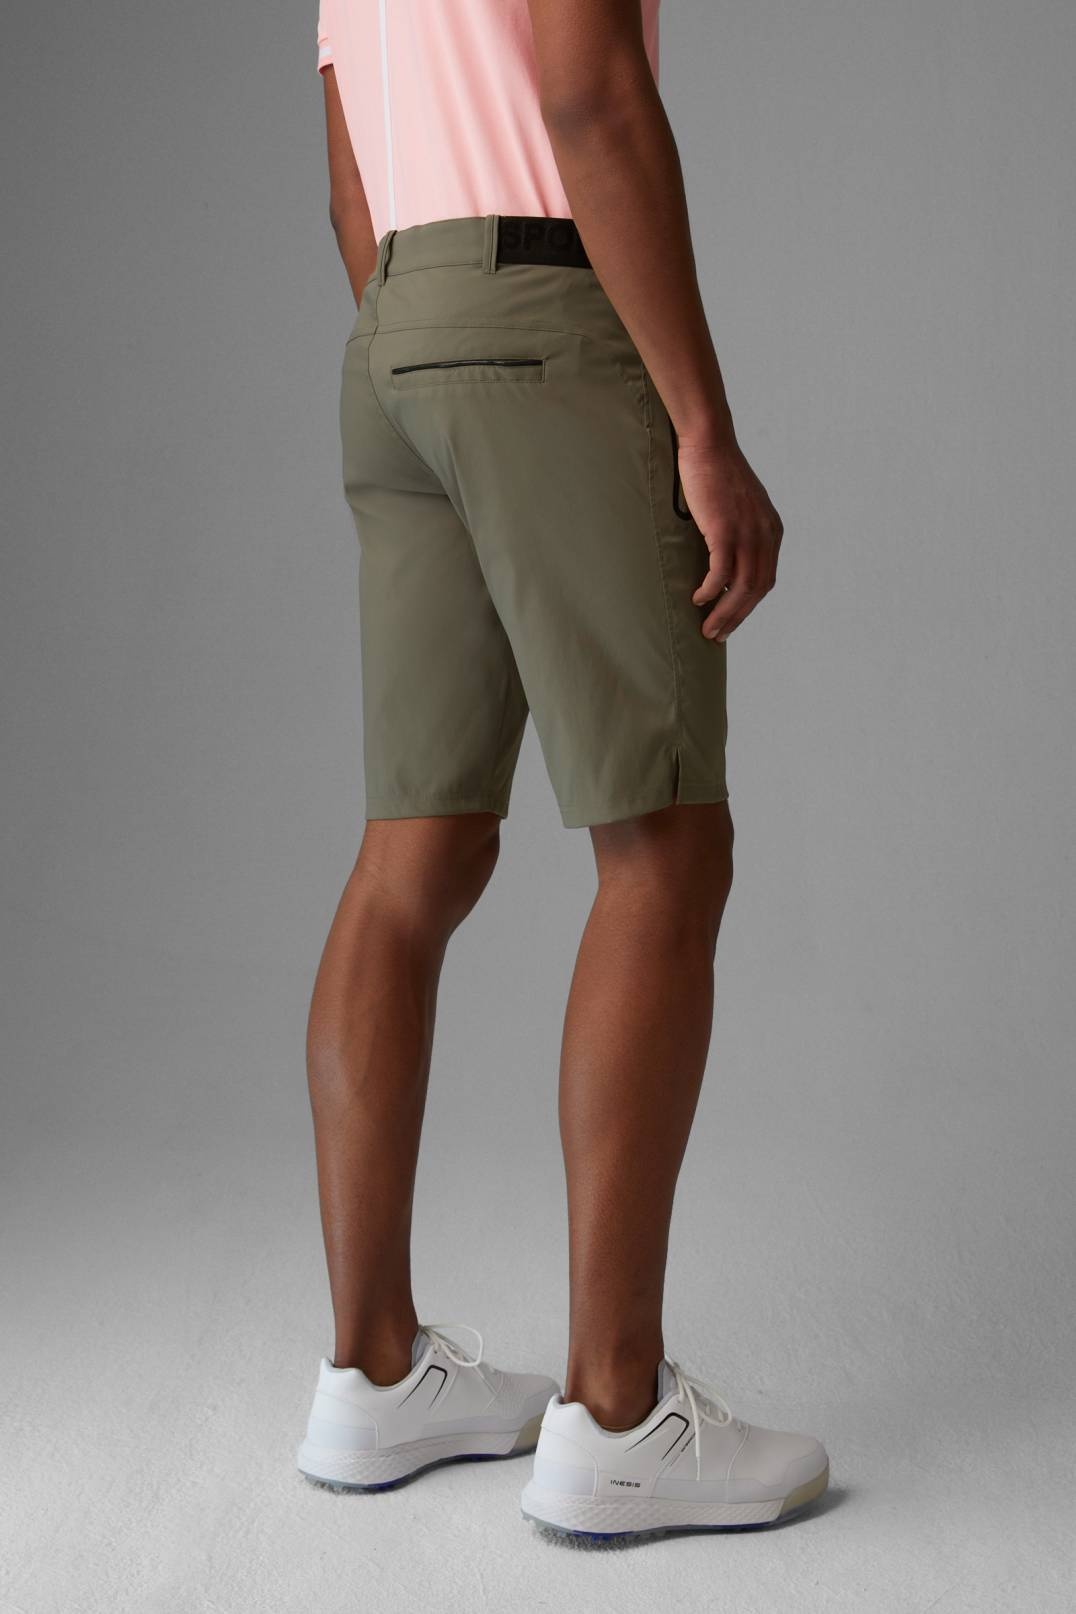 COLVIN FUNCTIONAL SHORTS IN OLIVE GREEN - 3